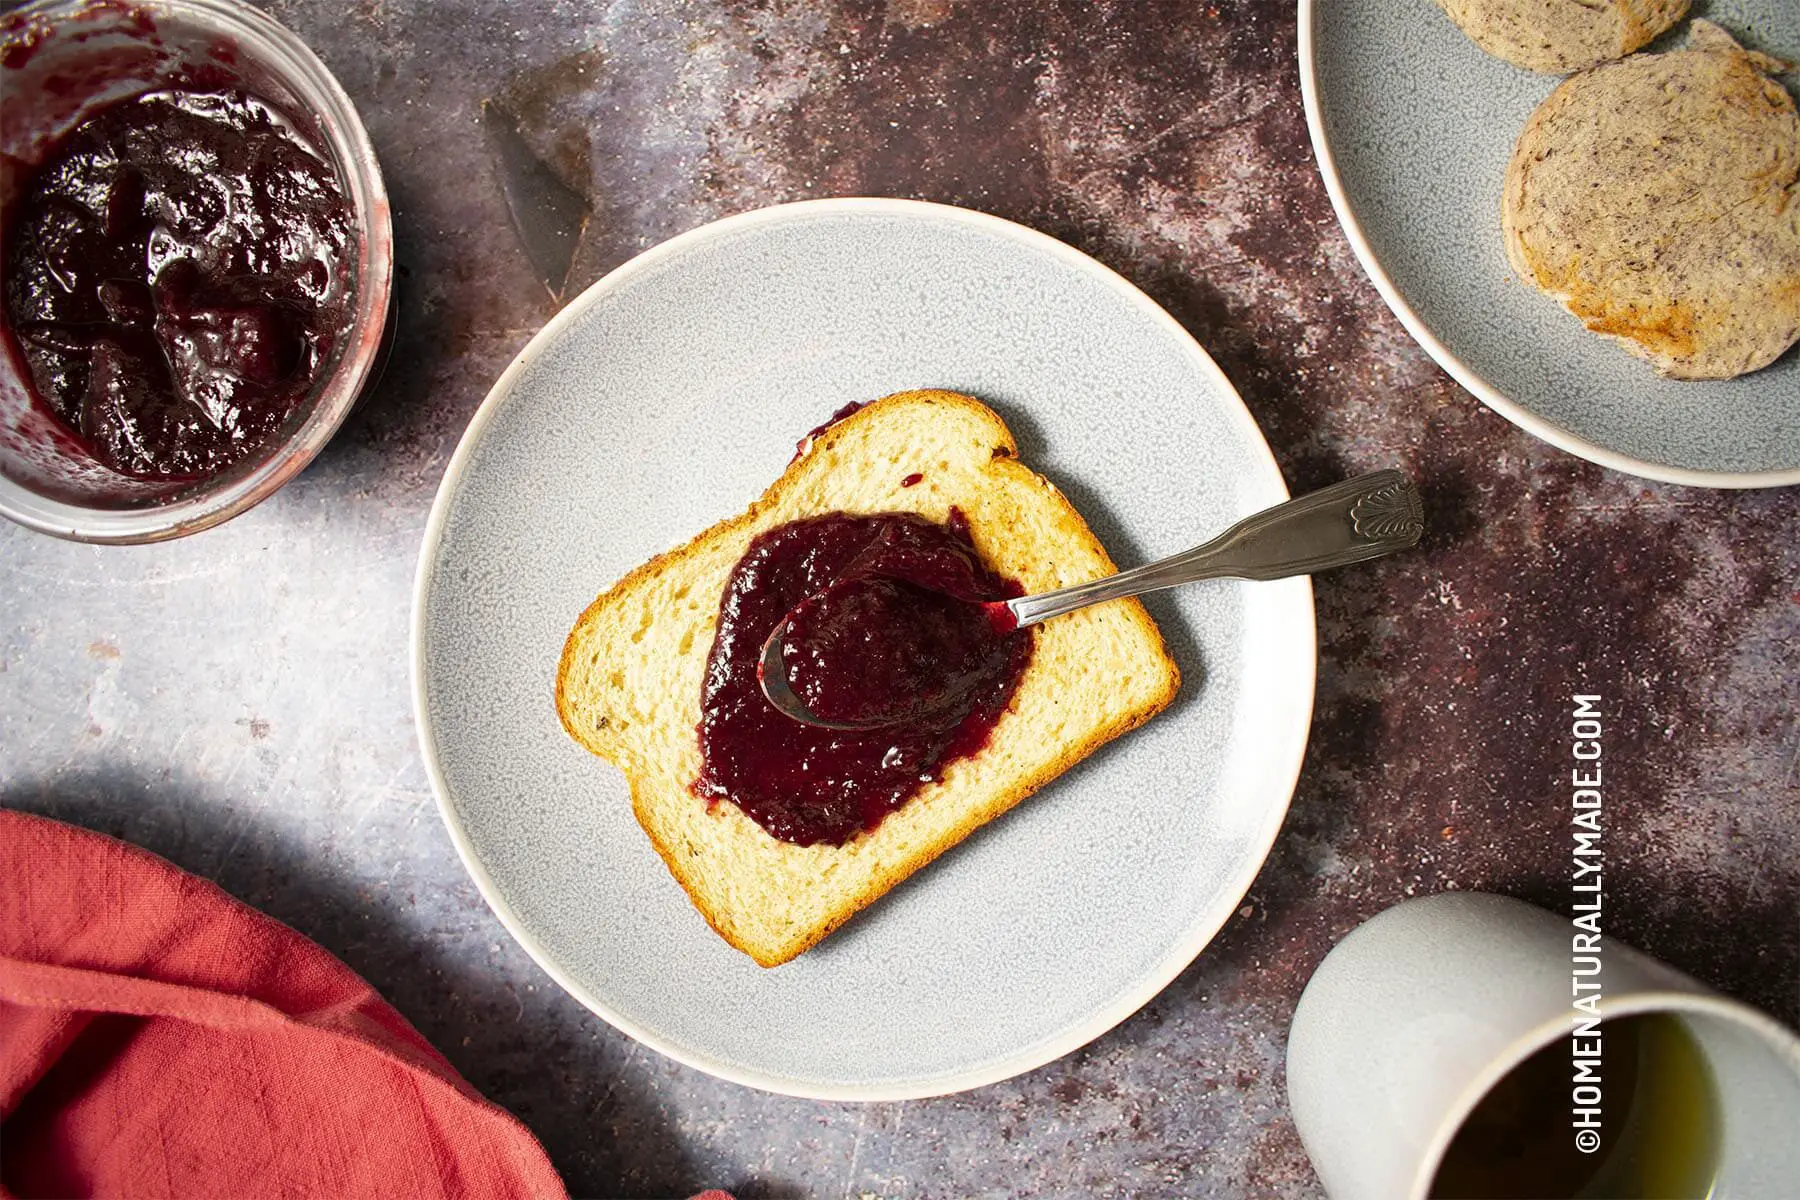 A slice of toast and bun with homemade cherry jam